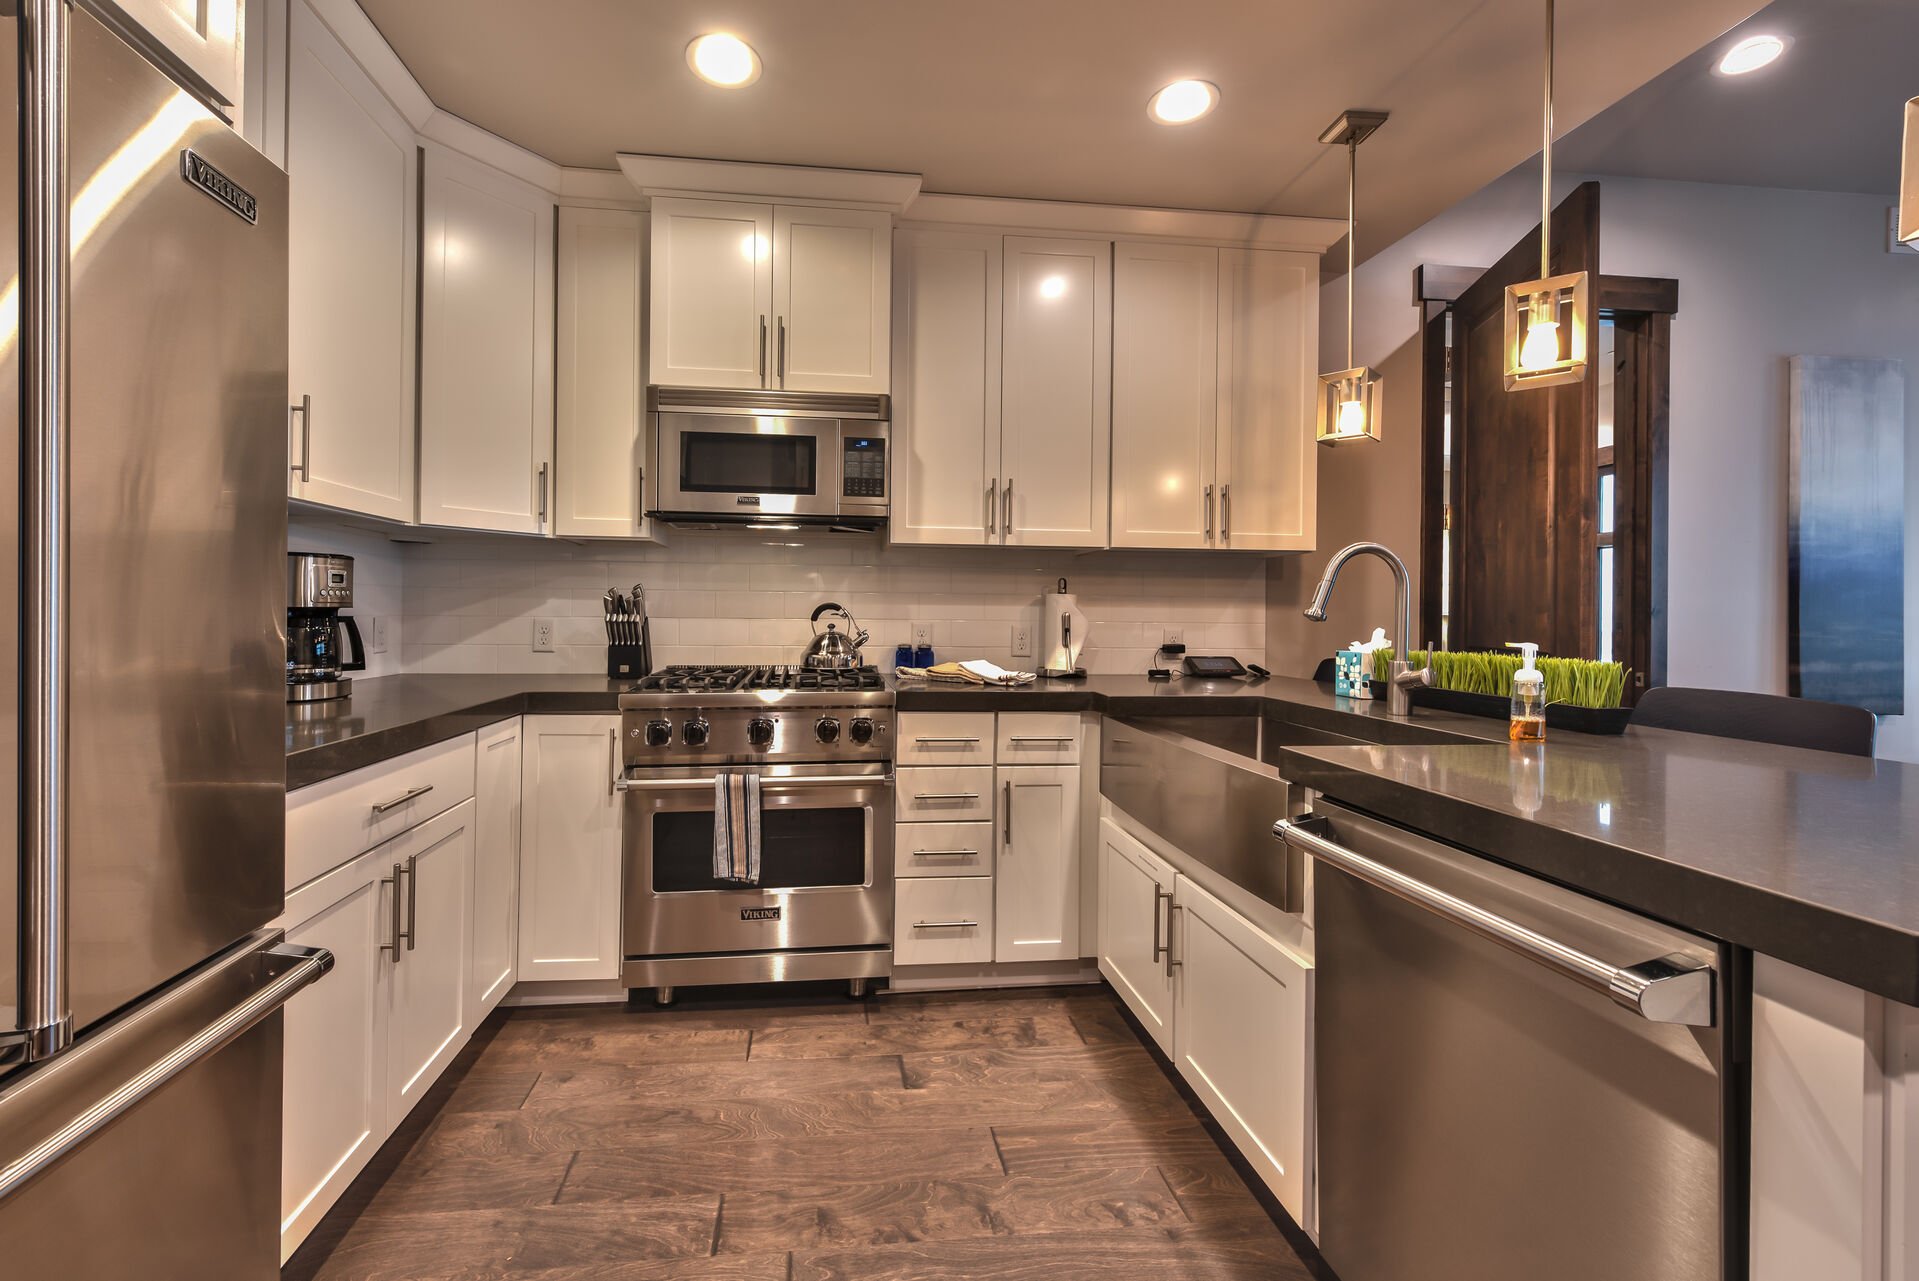 Gourmet Kitchen with Viking Appliances, Lovely Granite Counters, and a Stainless Farm Sink